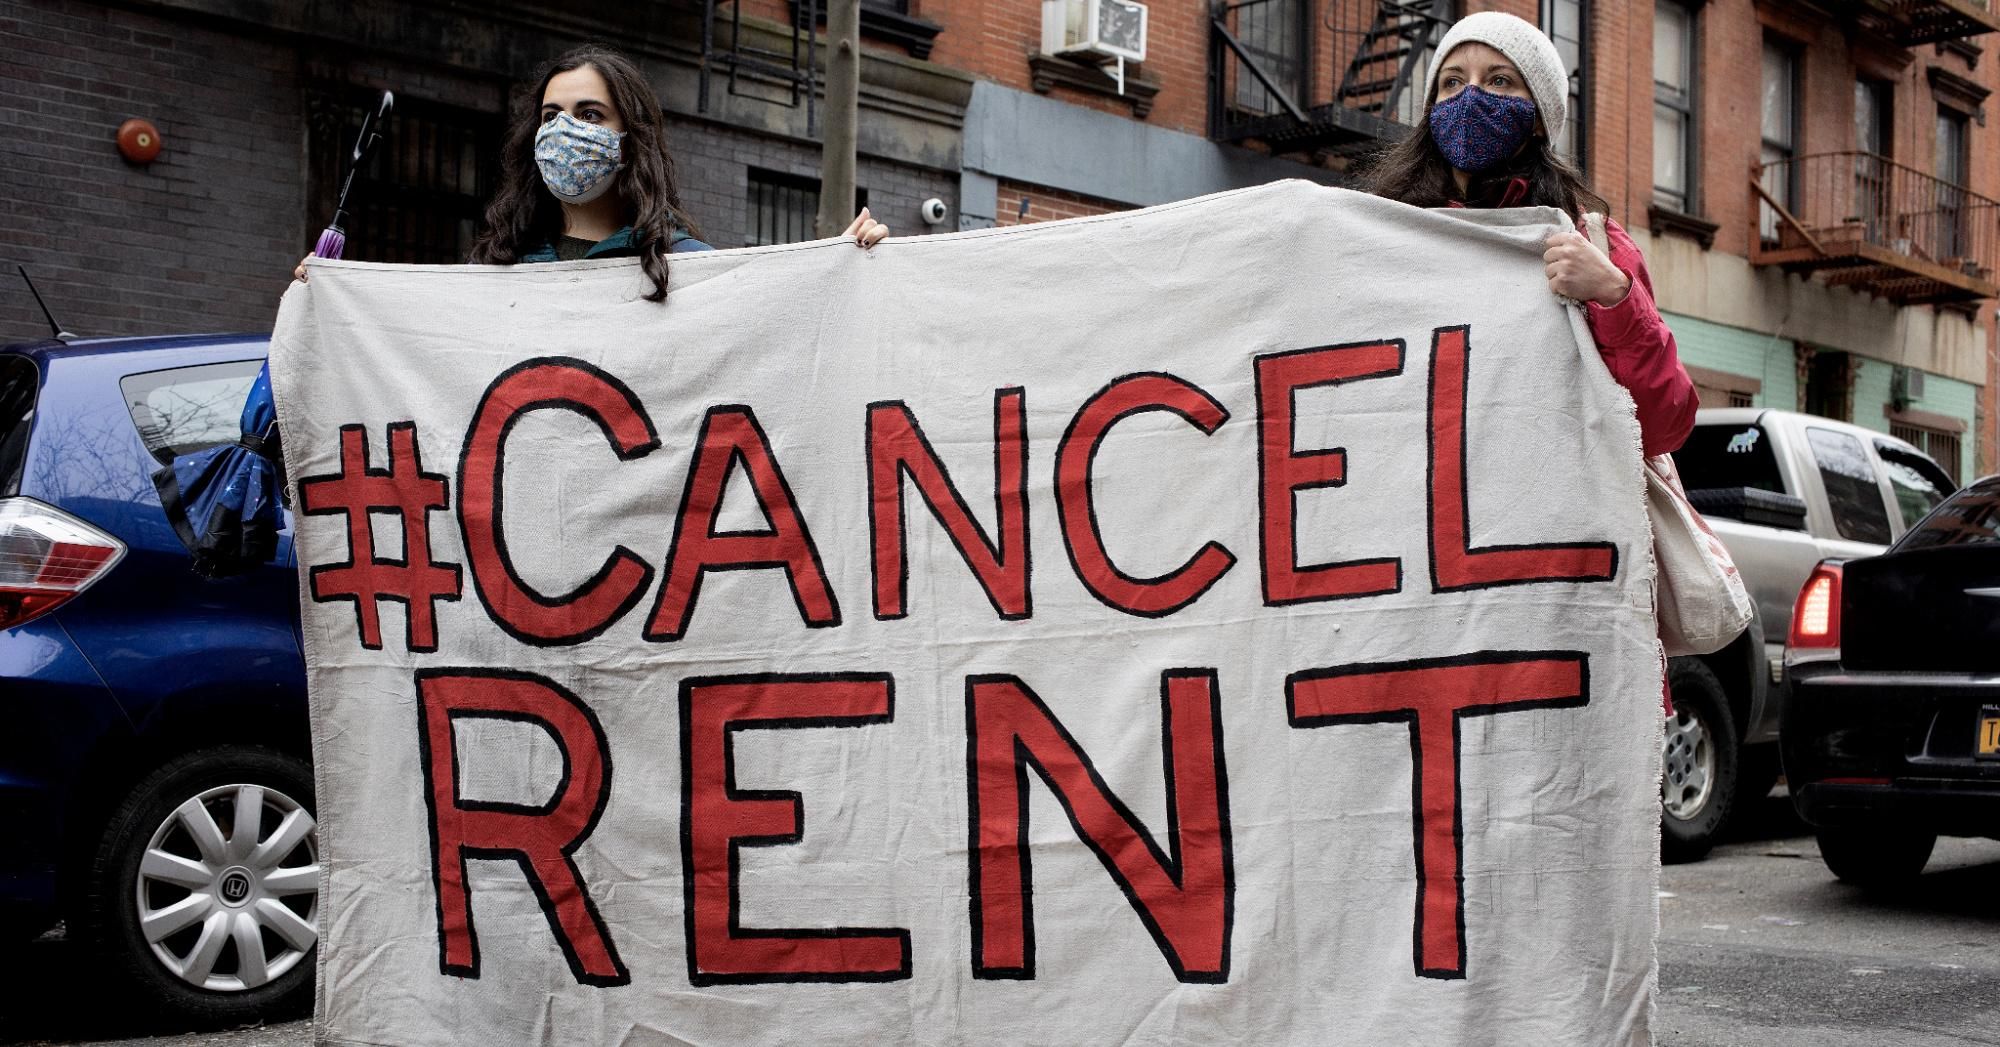 Tenant rights activists hold a demonstration to protest what they claim to be inadequate legislative relief for renters during the Covid-19 pandemic and to call for the cancellation of rent on February 28, 2021 in the East Village neighborhood of New York City. (Photo: Andrew Lichtenstein/Corbis via Getty Images)